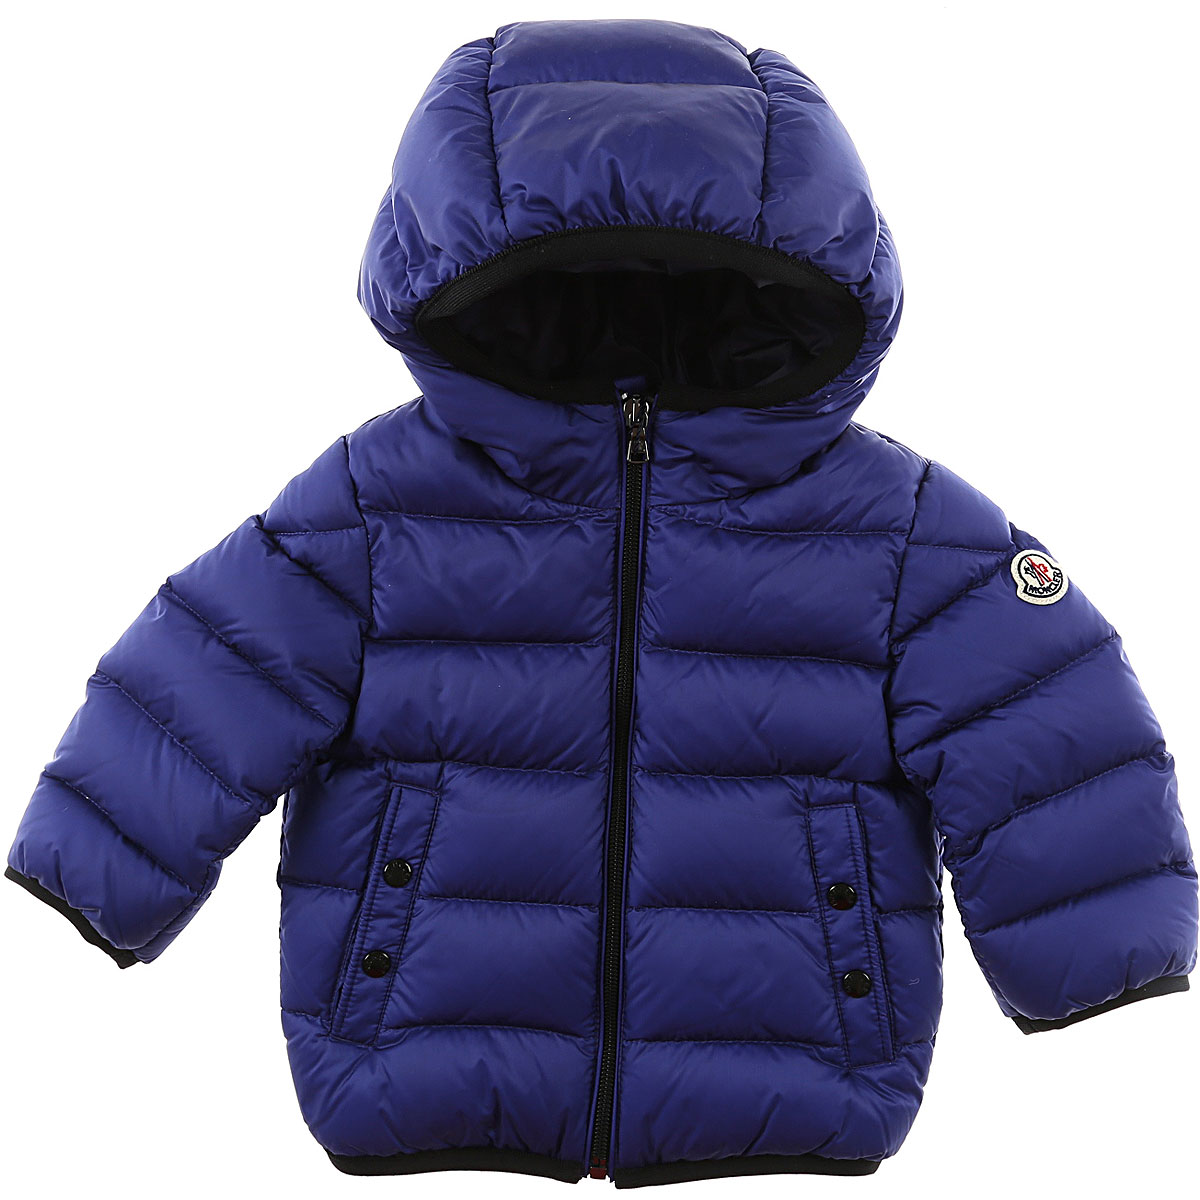 Baby Boy Clothing Moncler, Style code: 4199805-53329-732